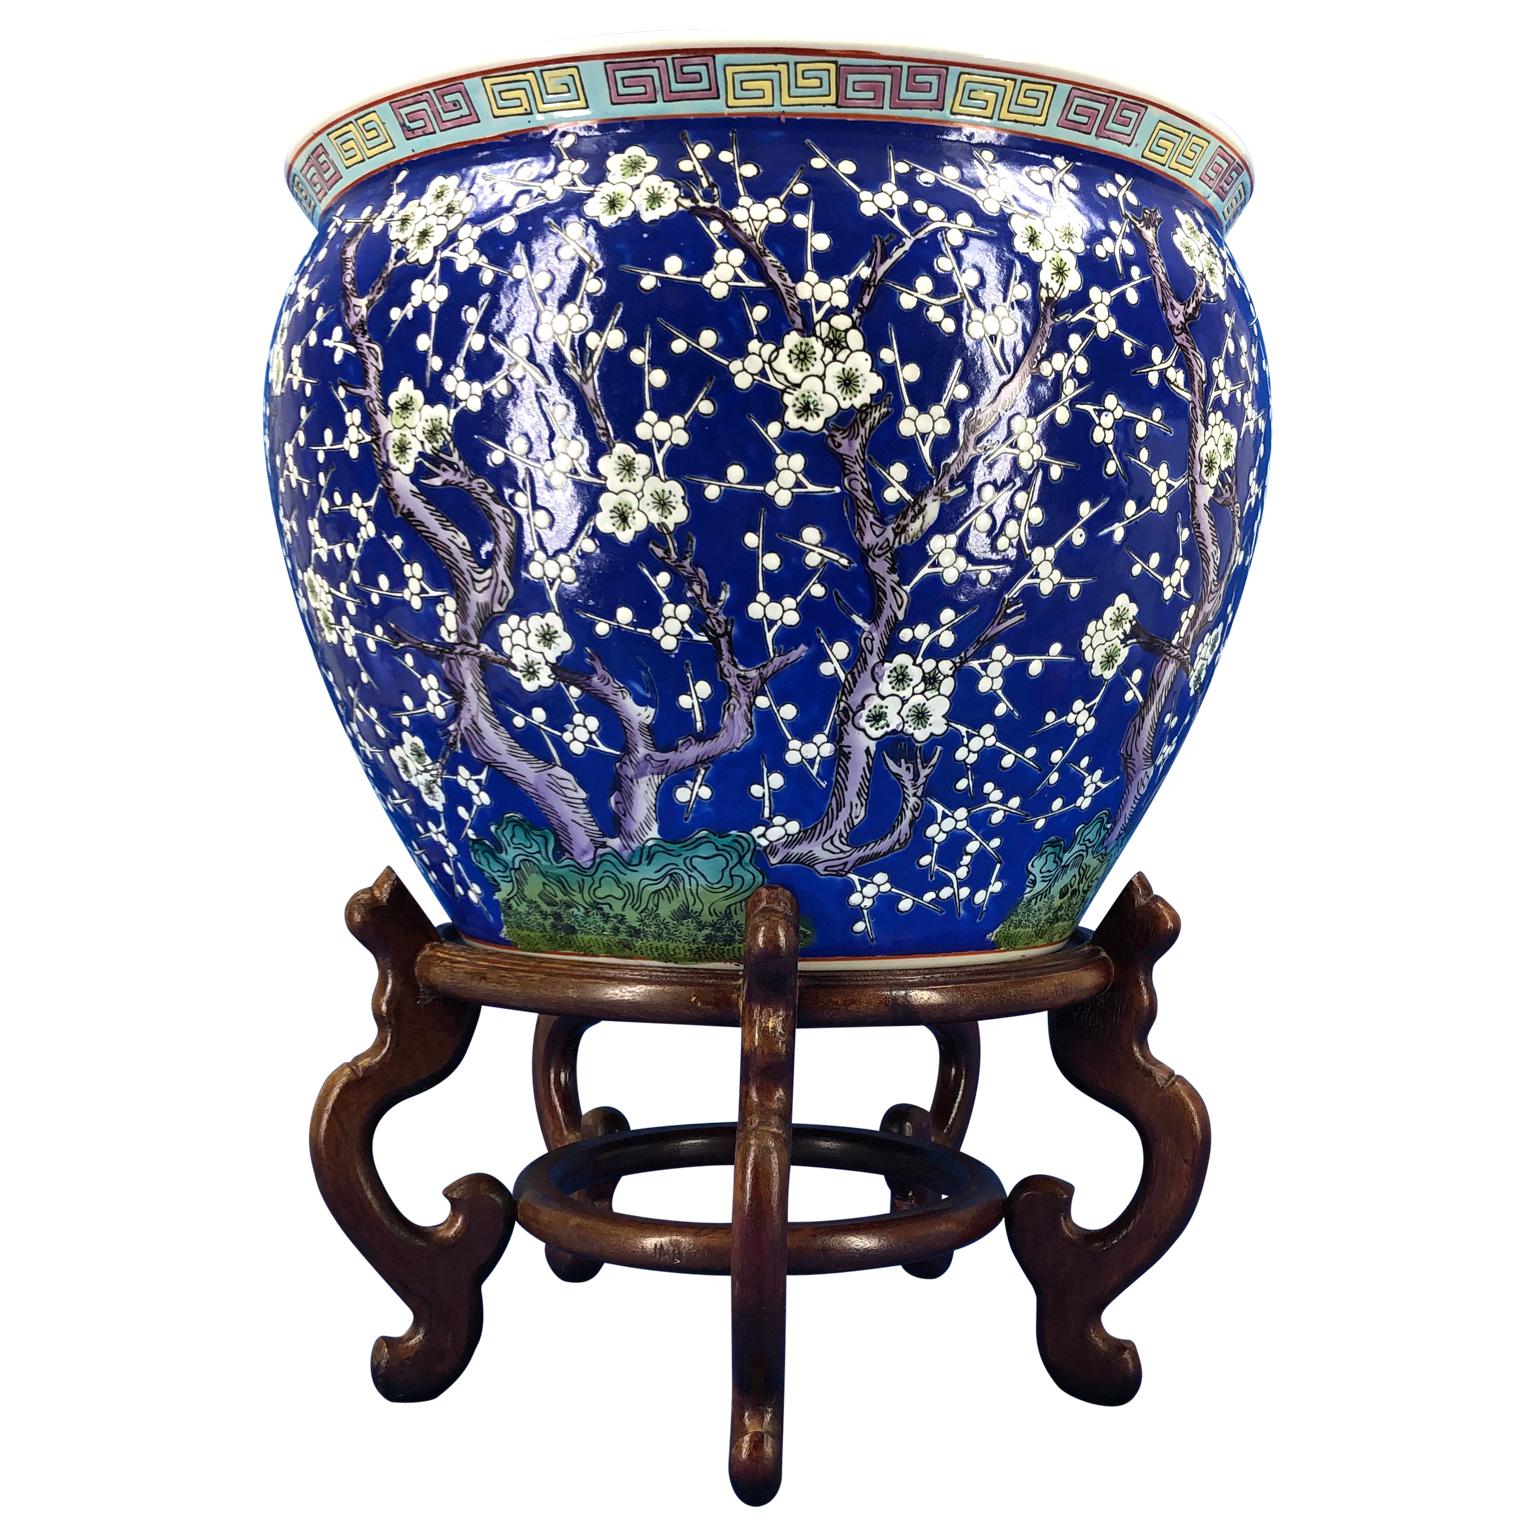 Large Chinese blue decorated porcelain jardinieres planter on wooden stand.